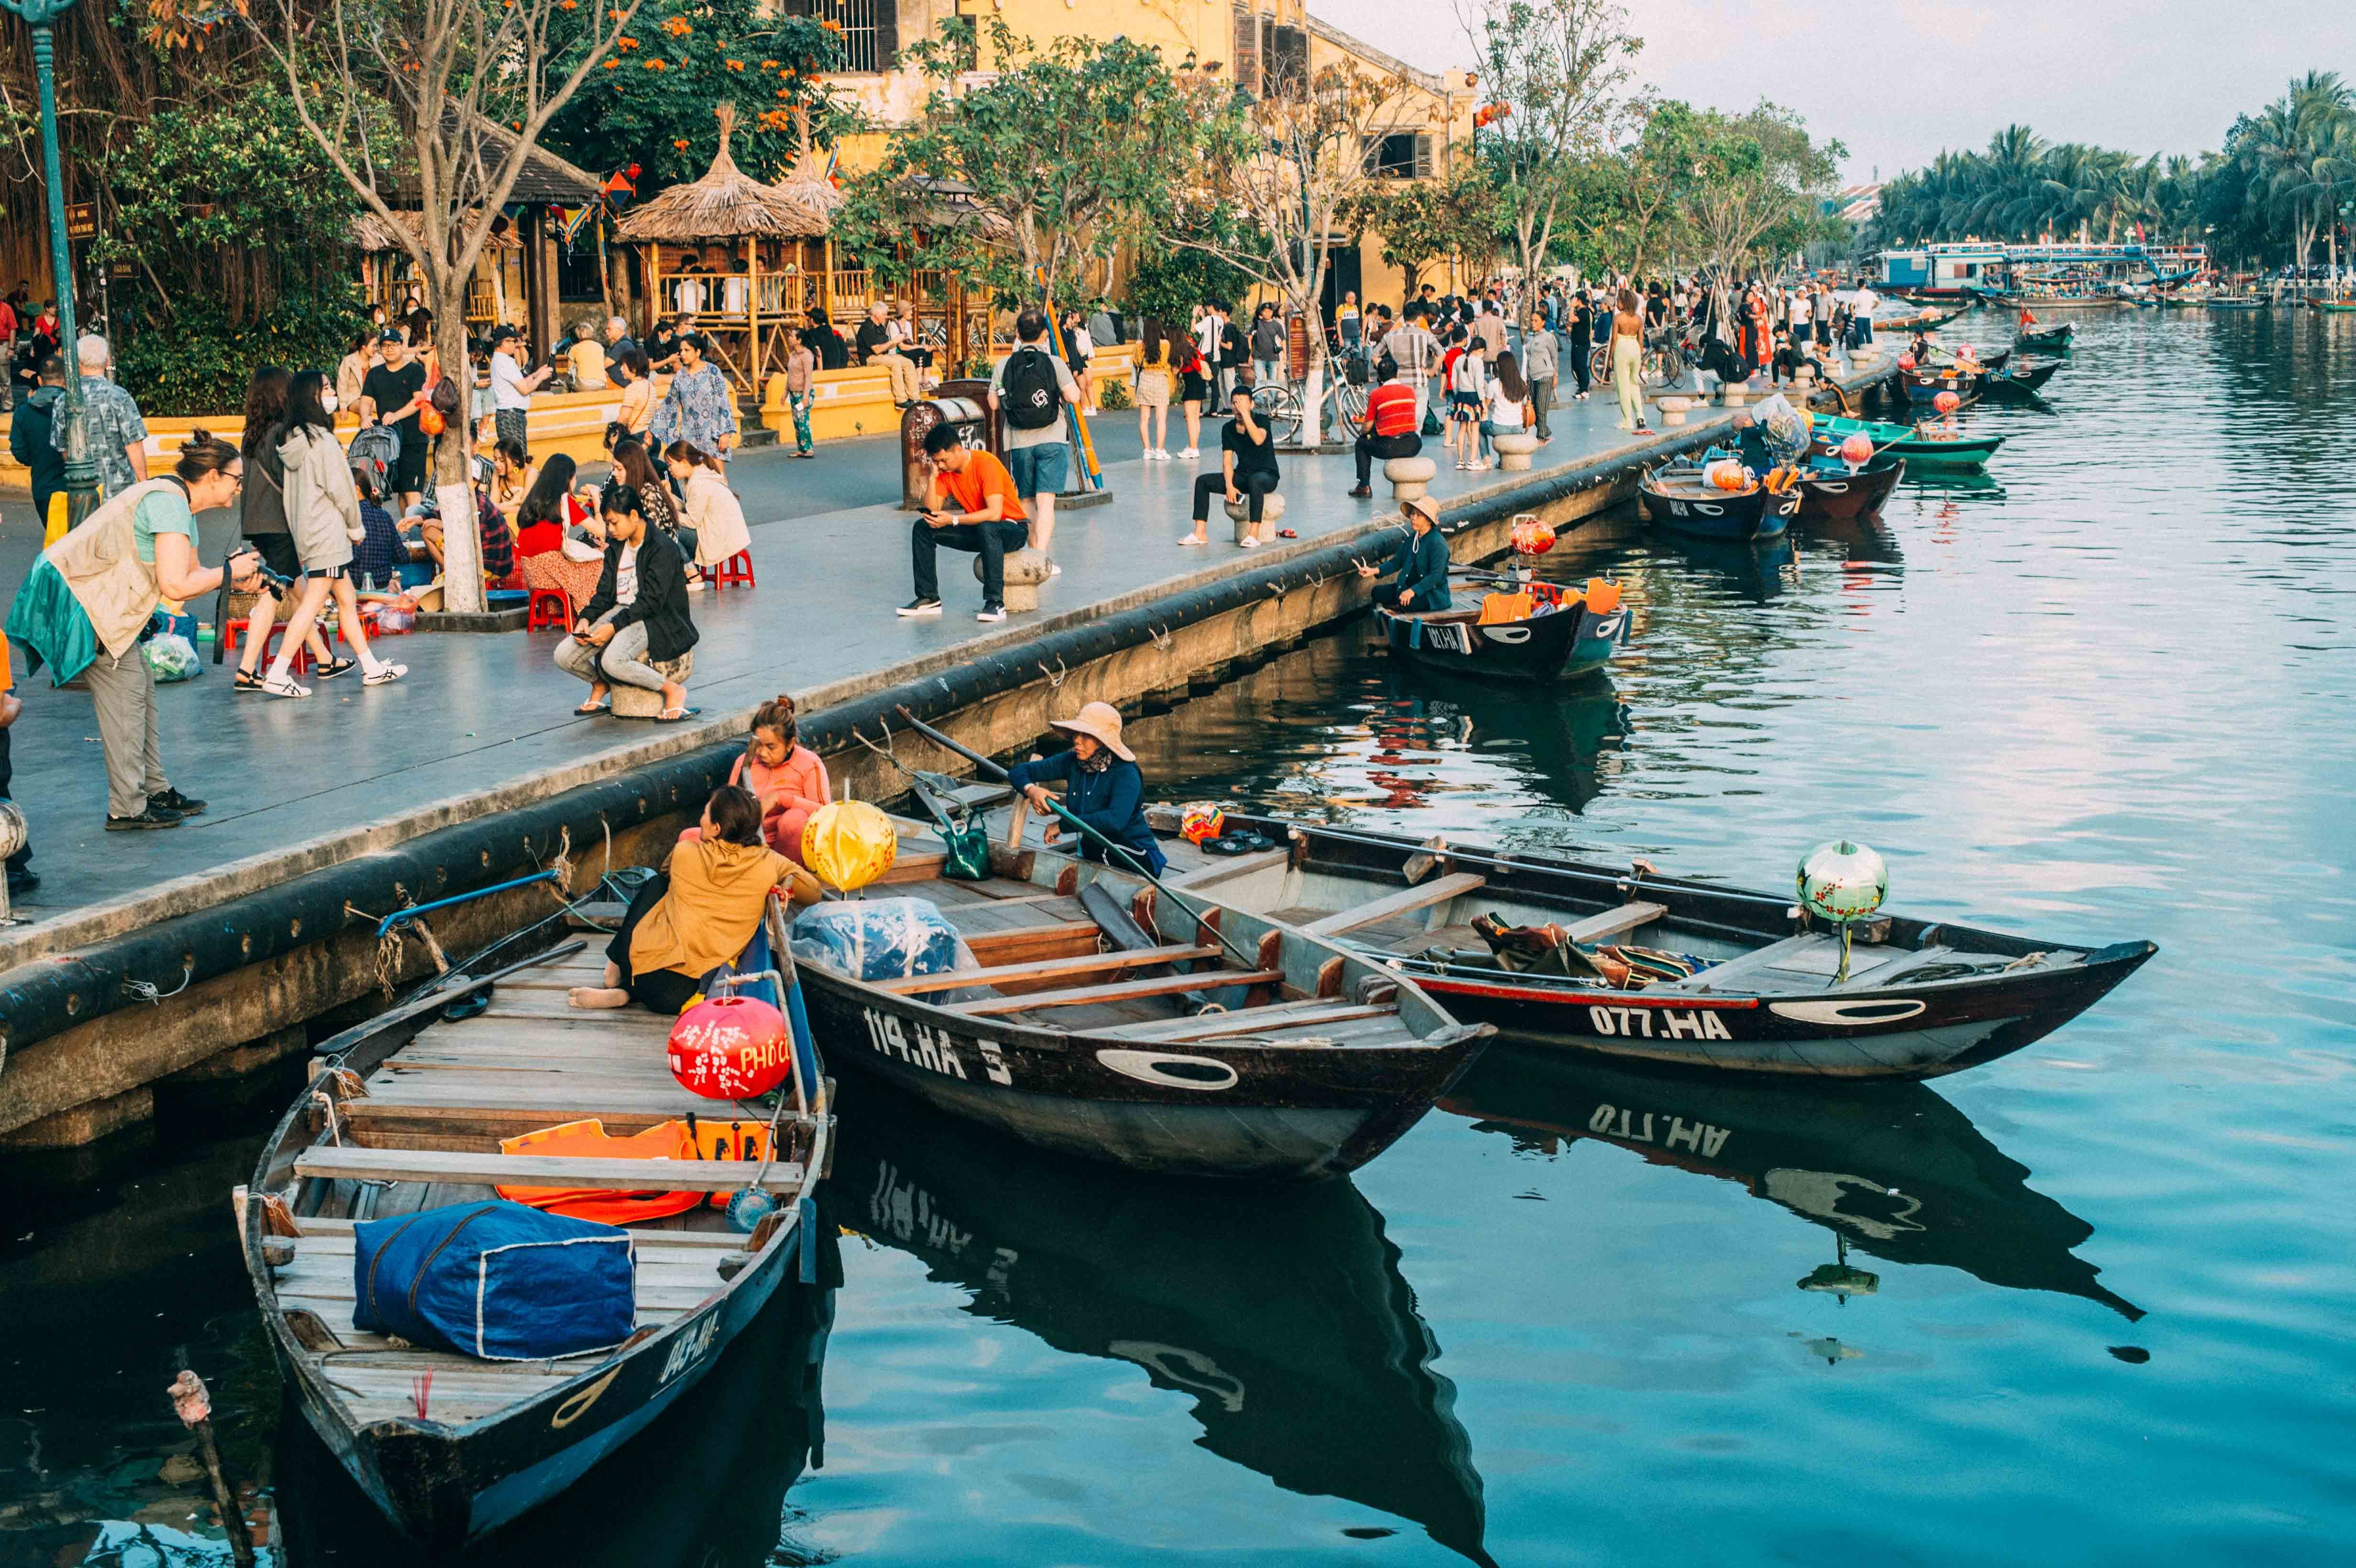 Hoi An, Vietnam with people sitting in boats.